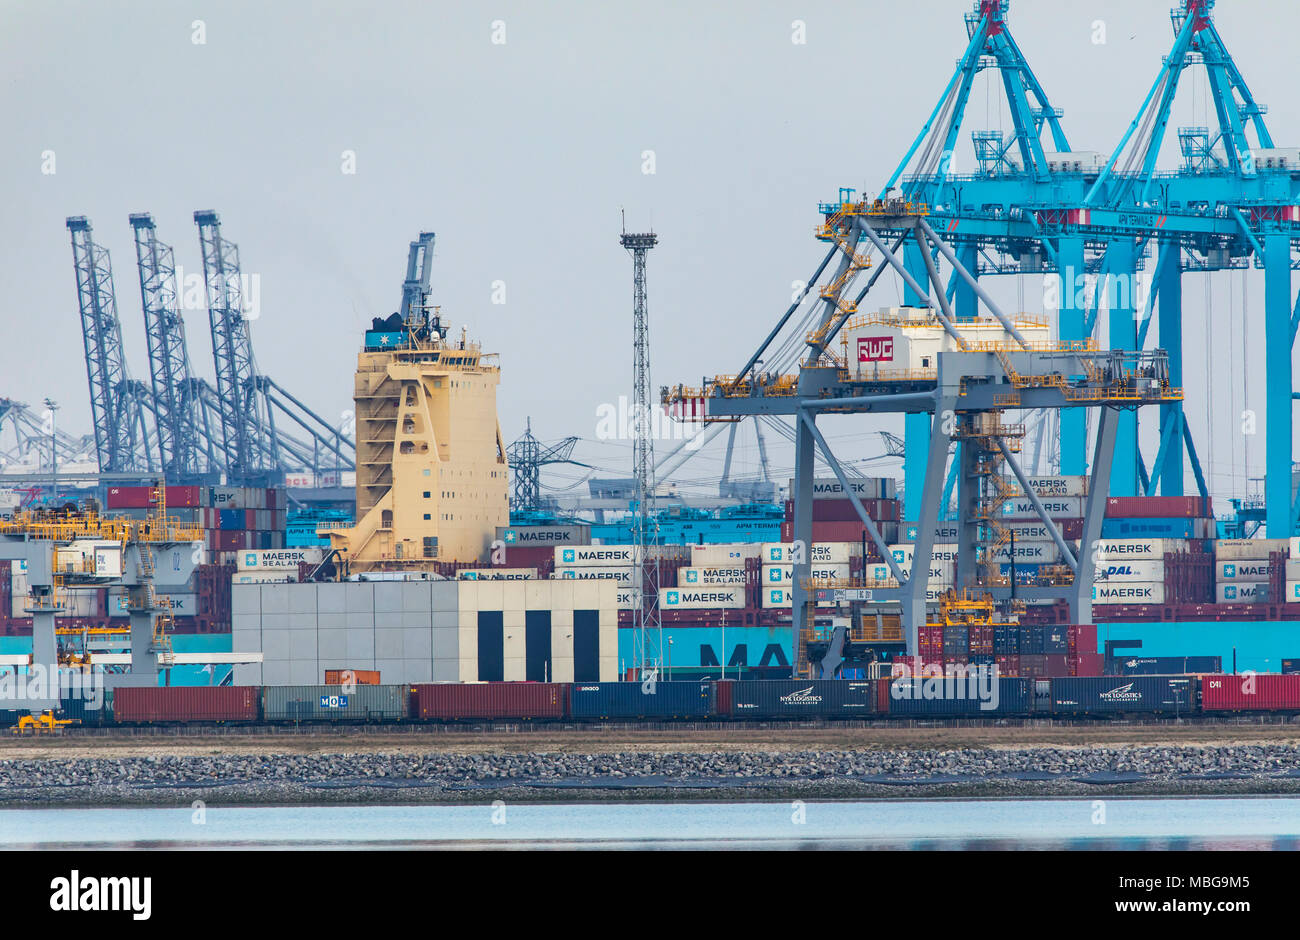 The seaport of Rotterdam, Netherlands, deep-sea port Maasvlakte 2, on an artificially created land area in front of the original coast, Rotterdam Worl Stock Photo